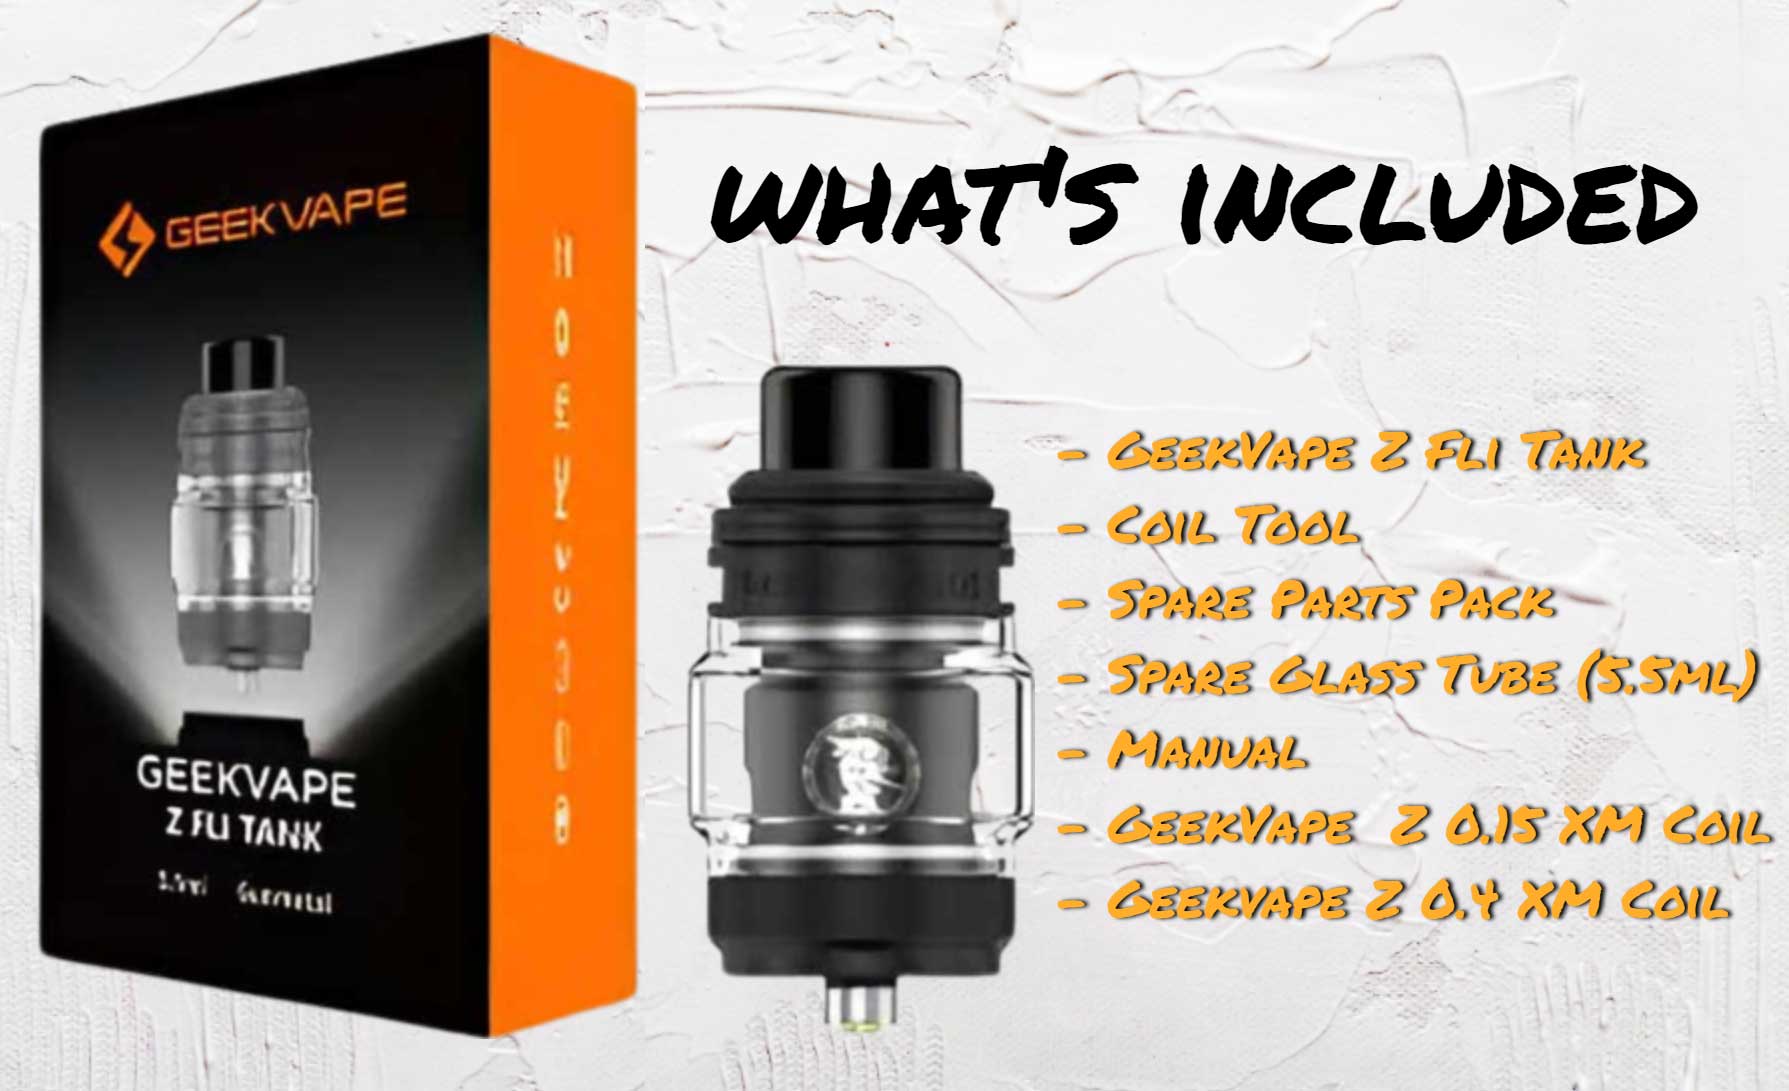 Geekvape Z Fli Sub-Ohm Tank What's Included In The Package